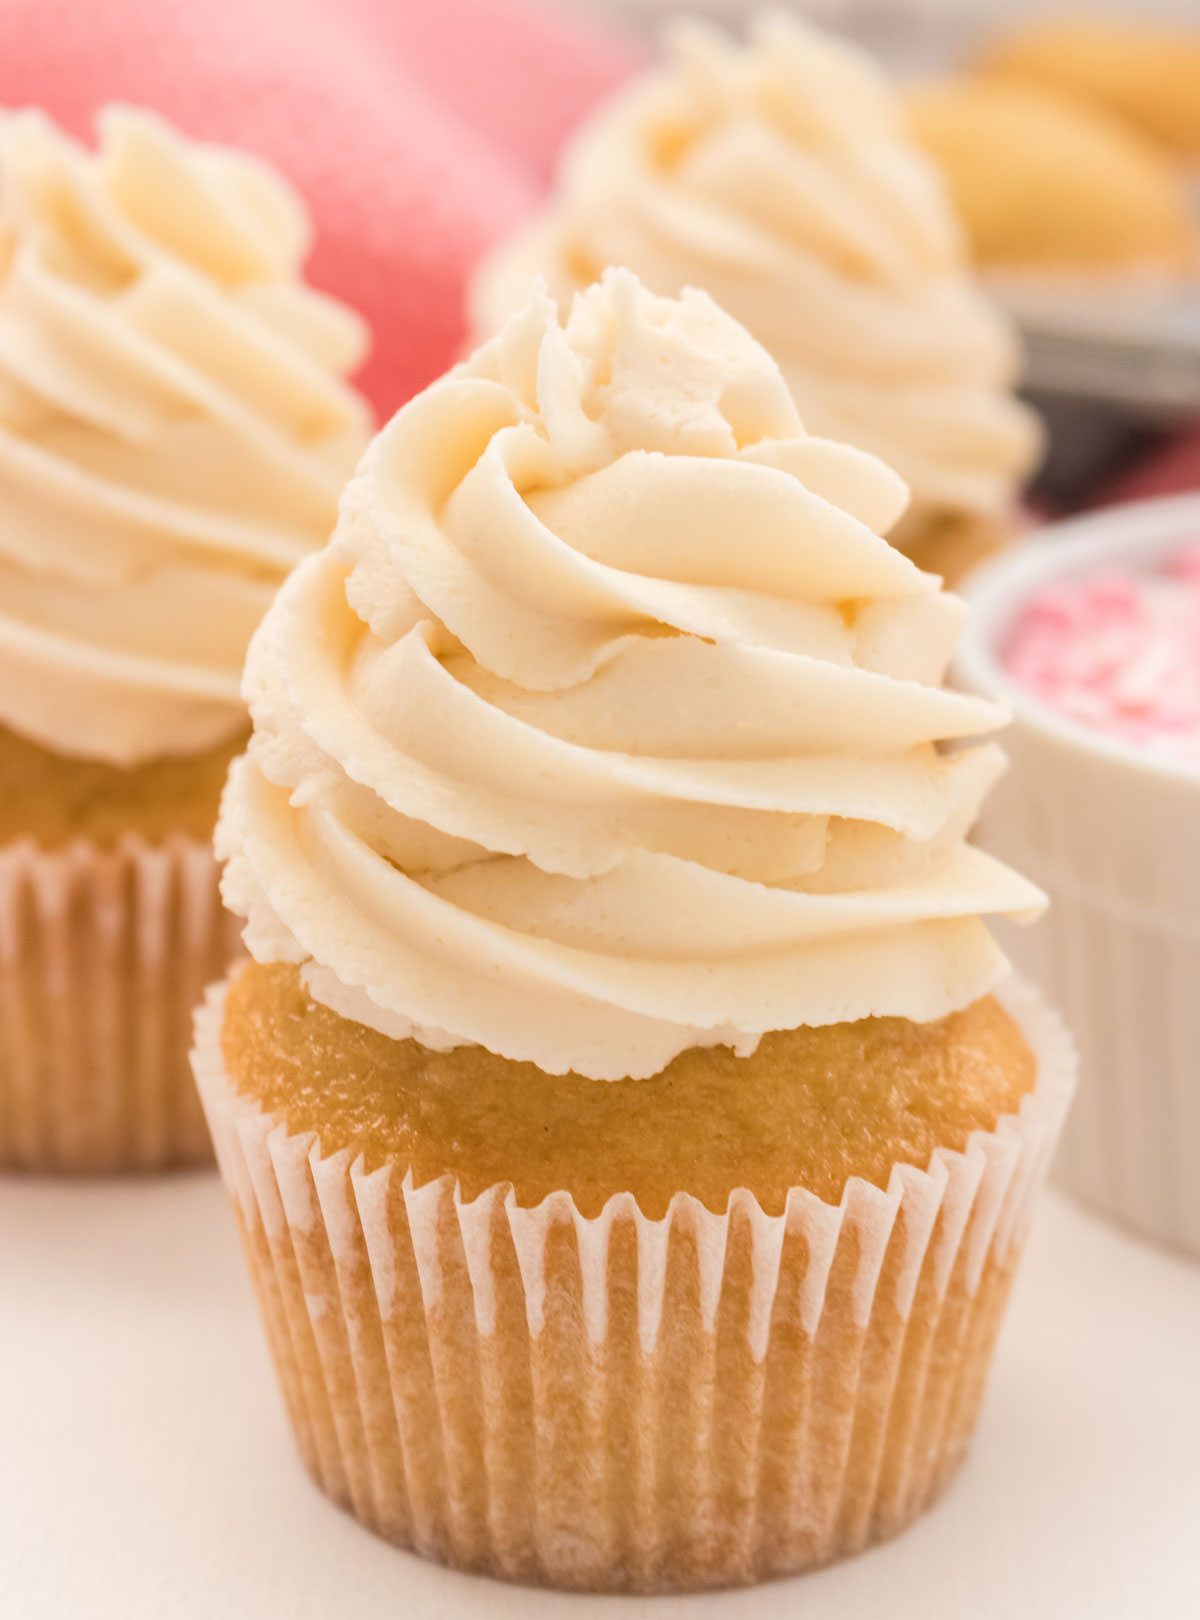 Closeup on a Homemade Vanilla Cupcake topped with Buttercream Frosting sitting next to a ramekin full of pink sprinkles and more yellow cupcakes.